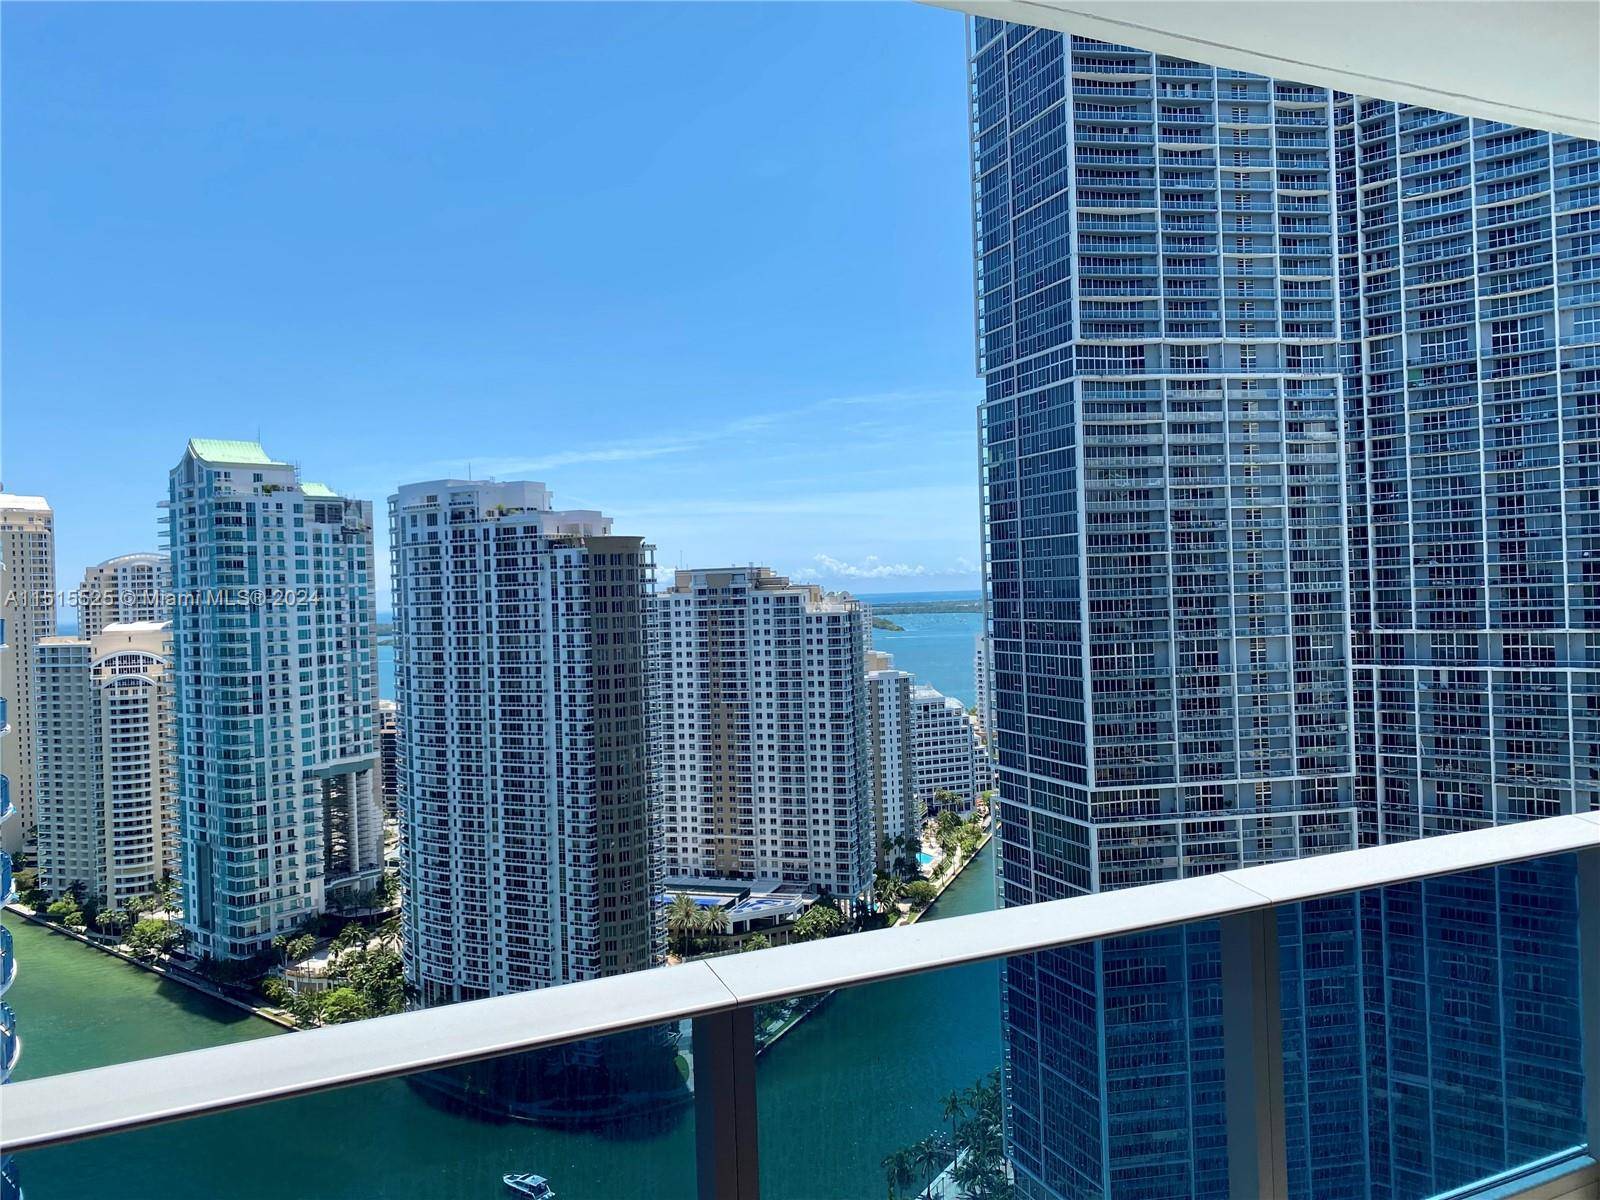 SPECTACULAR 2BD 2. 5BA FURNISHED UNIT AT THE EXCLUSIVE EPIC RESIDENCES WITH OCEAN AND CITY VIEWS, WRAPAROUND BALCONY, CERAMIC FLOORS THROUGHOUT, SPLIT FLOOR PLAN WITH HUGE MASTER BATHROOM AND DOUBLE ...